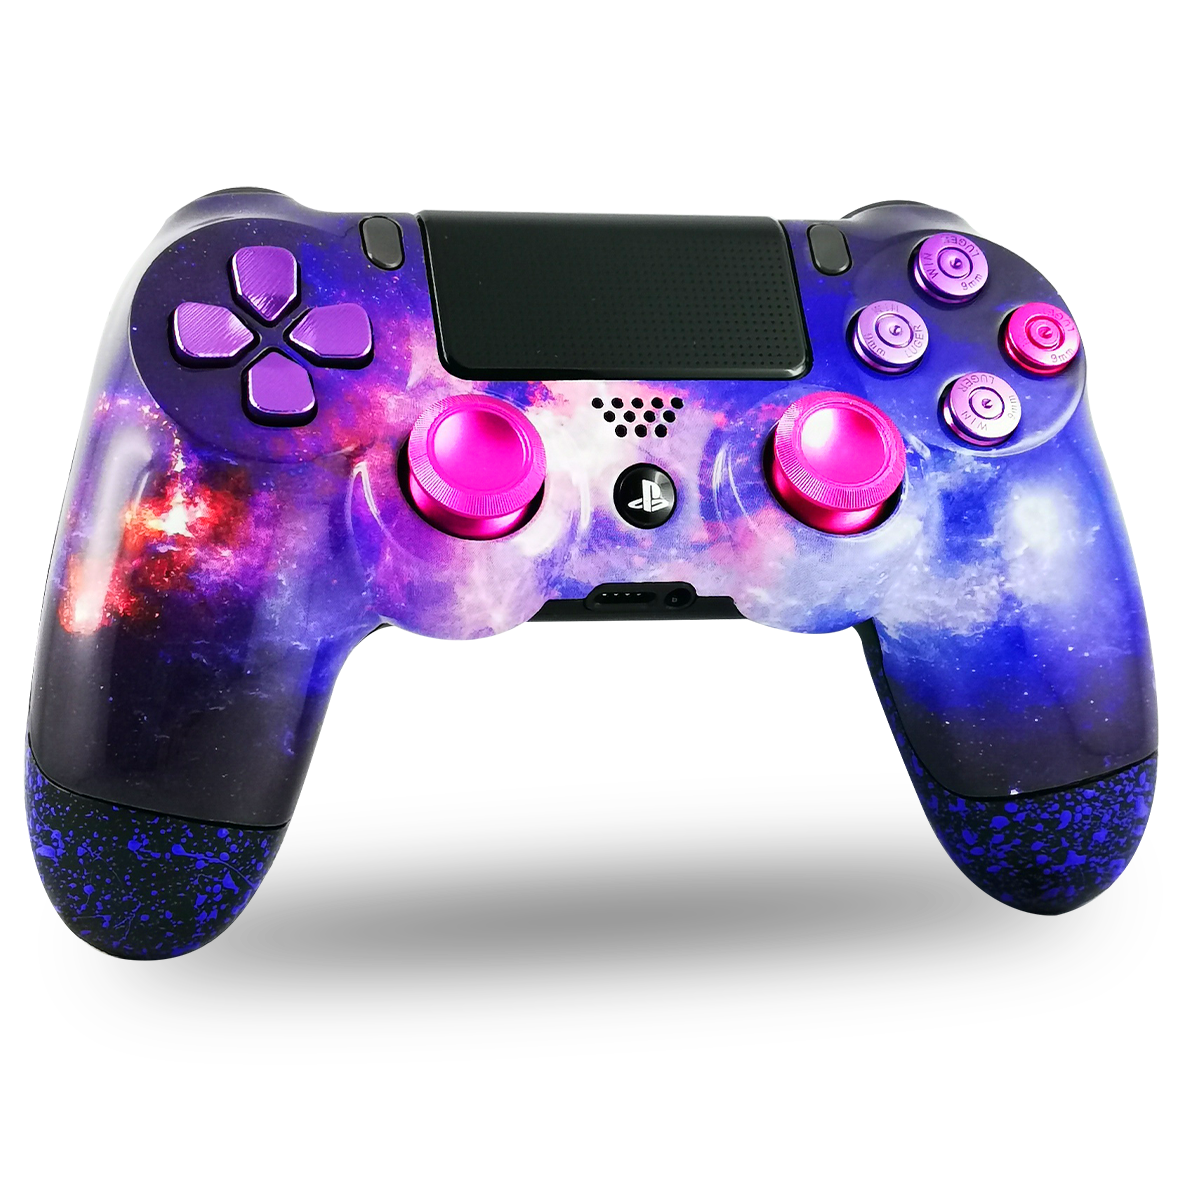 manette-PS4-custom-playstation-4-sony-personnalisee-drawmypad-nebuleuse